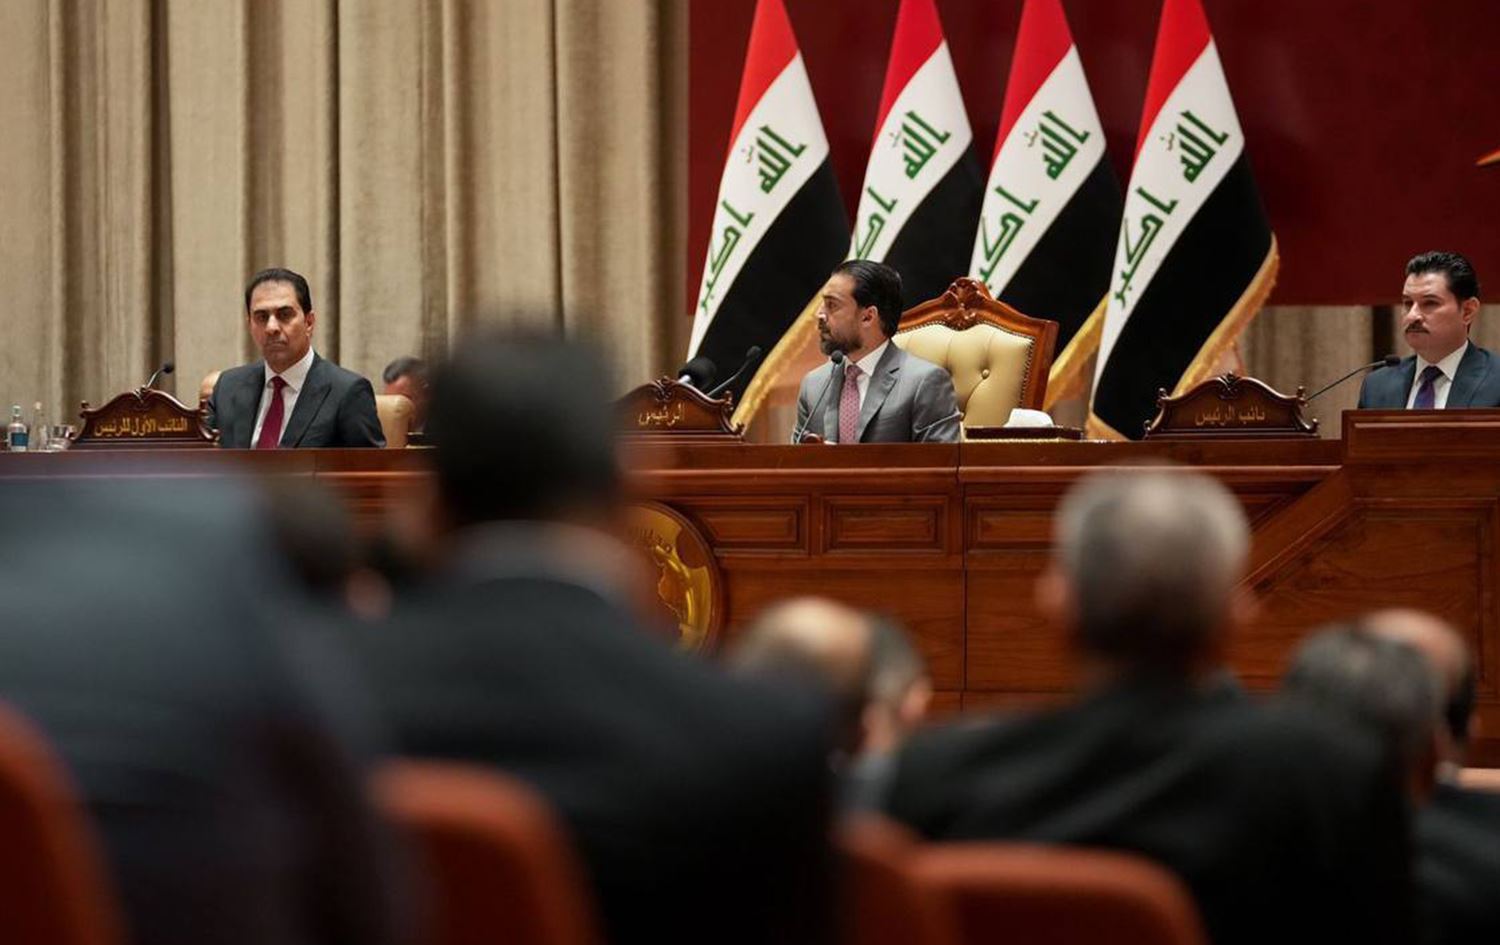 Iraqi Parliament's Human Rights Committee urges swift enactment of "Enforced Disappearance Law"